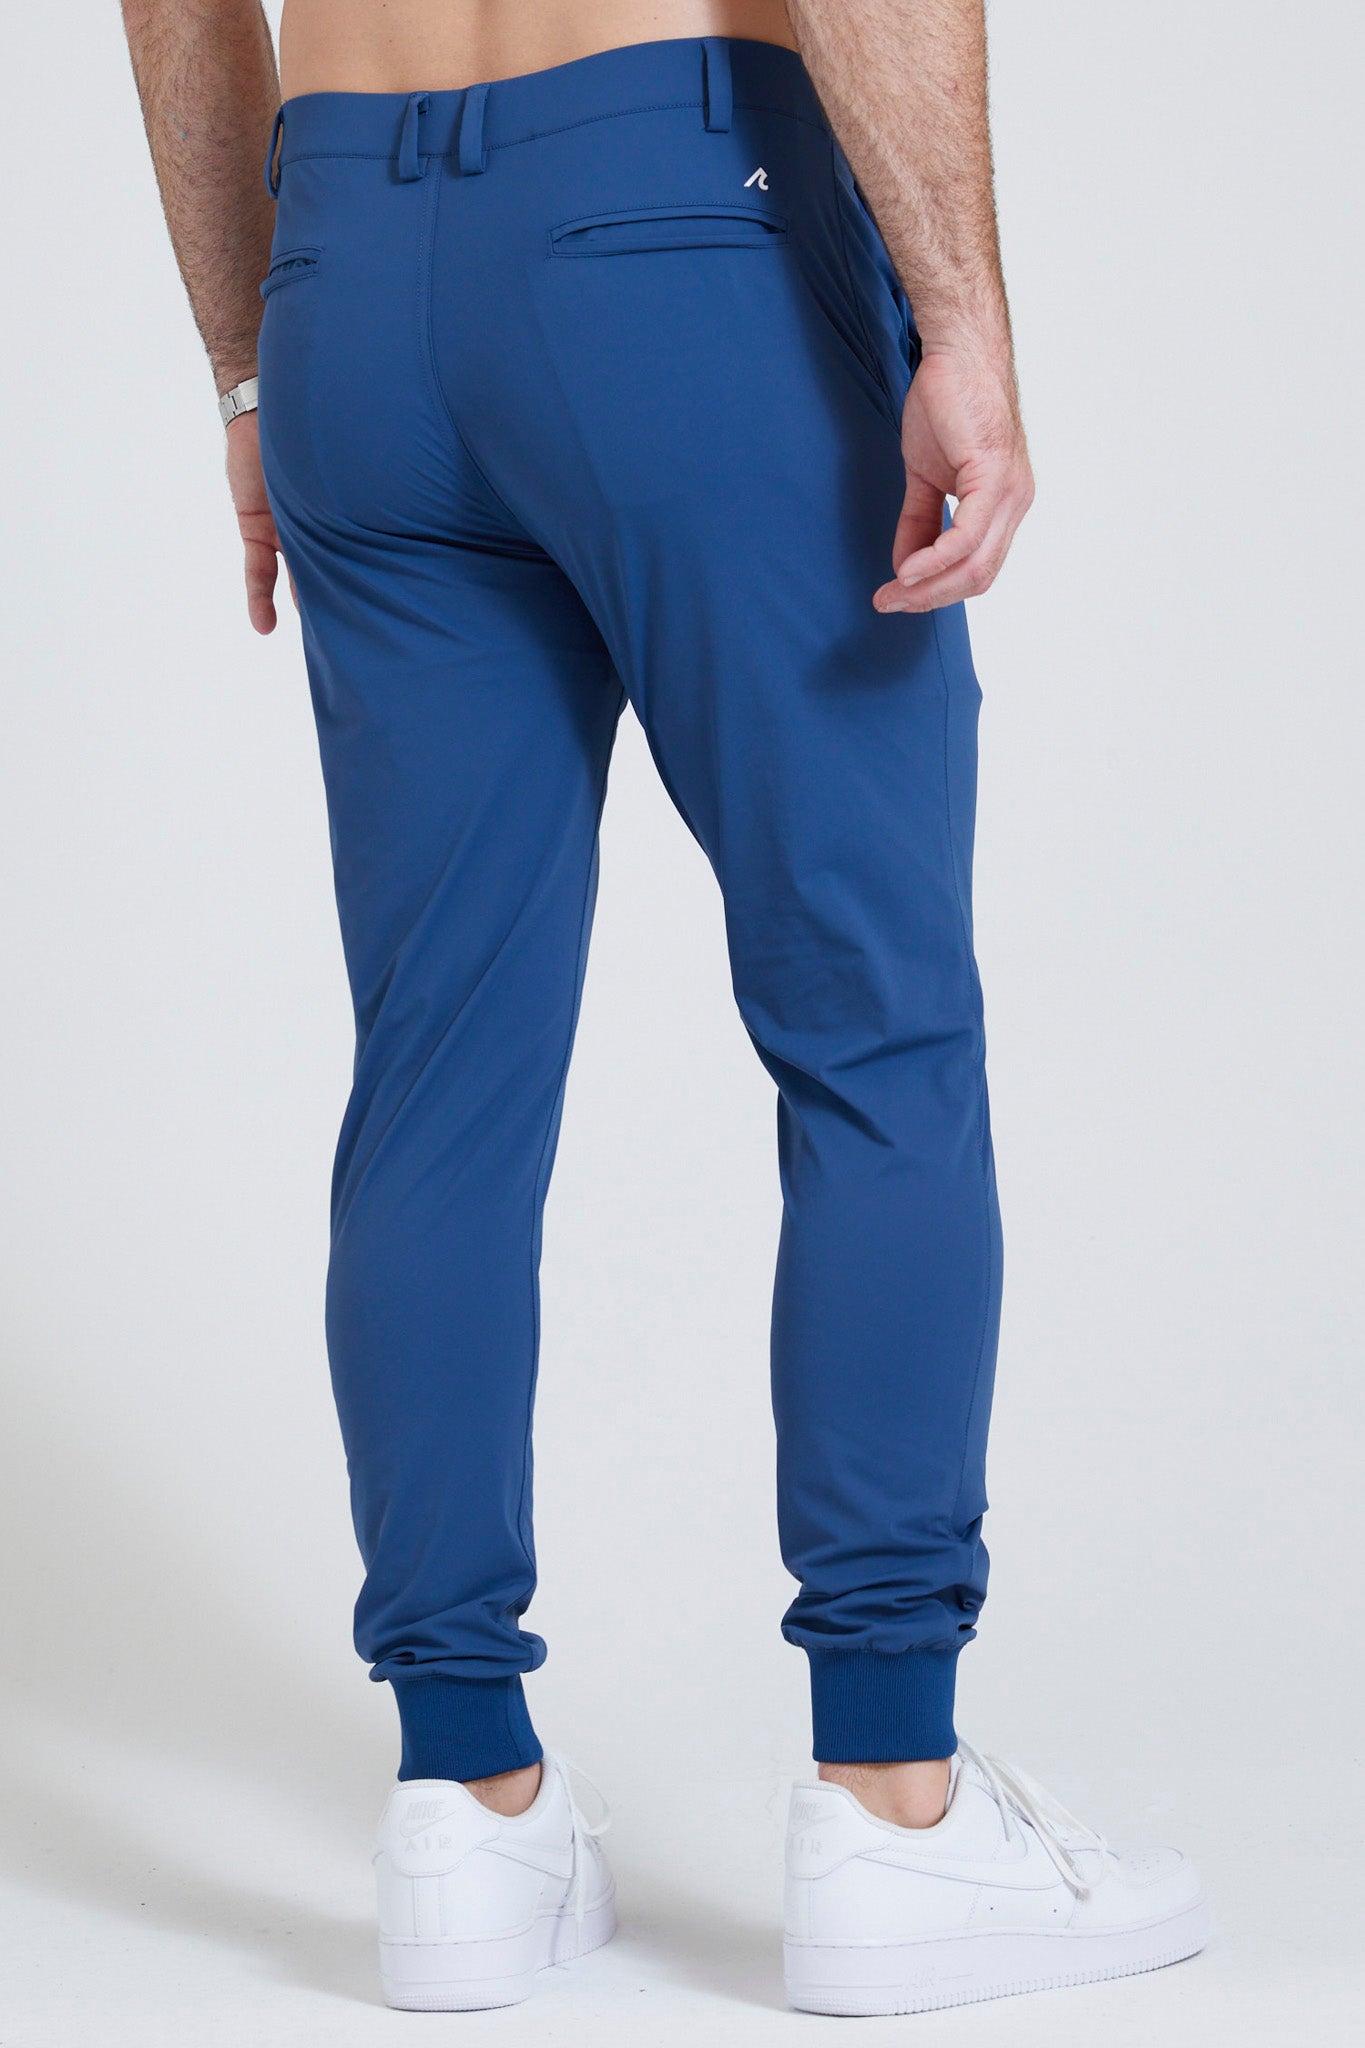 Image of the halliday pull-on jogger in indigo